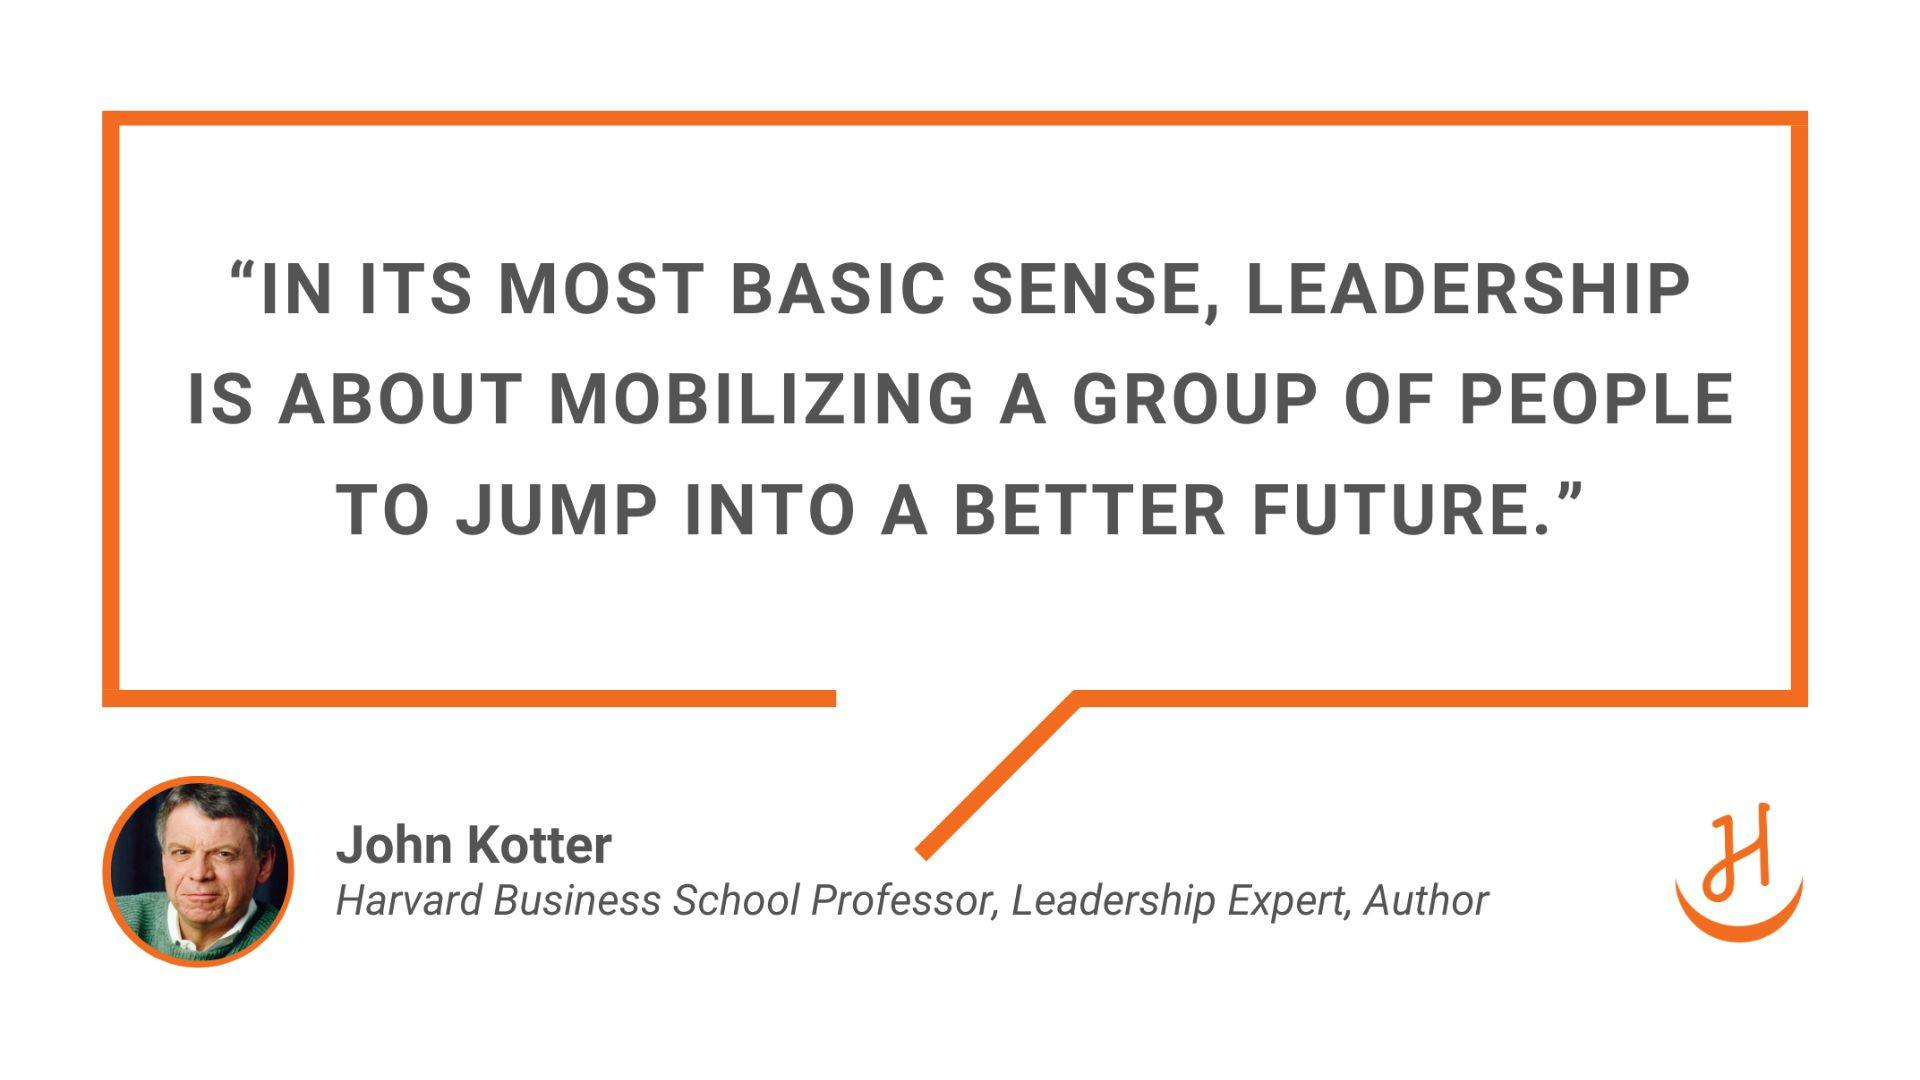 “In its most basic sense, leadership is about mobilizing a group of people to jump into a better future.” Quote by John Kotter, Harvard Business School Professor, Leadership Expert, Author.